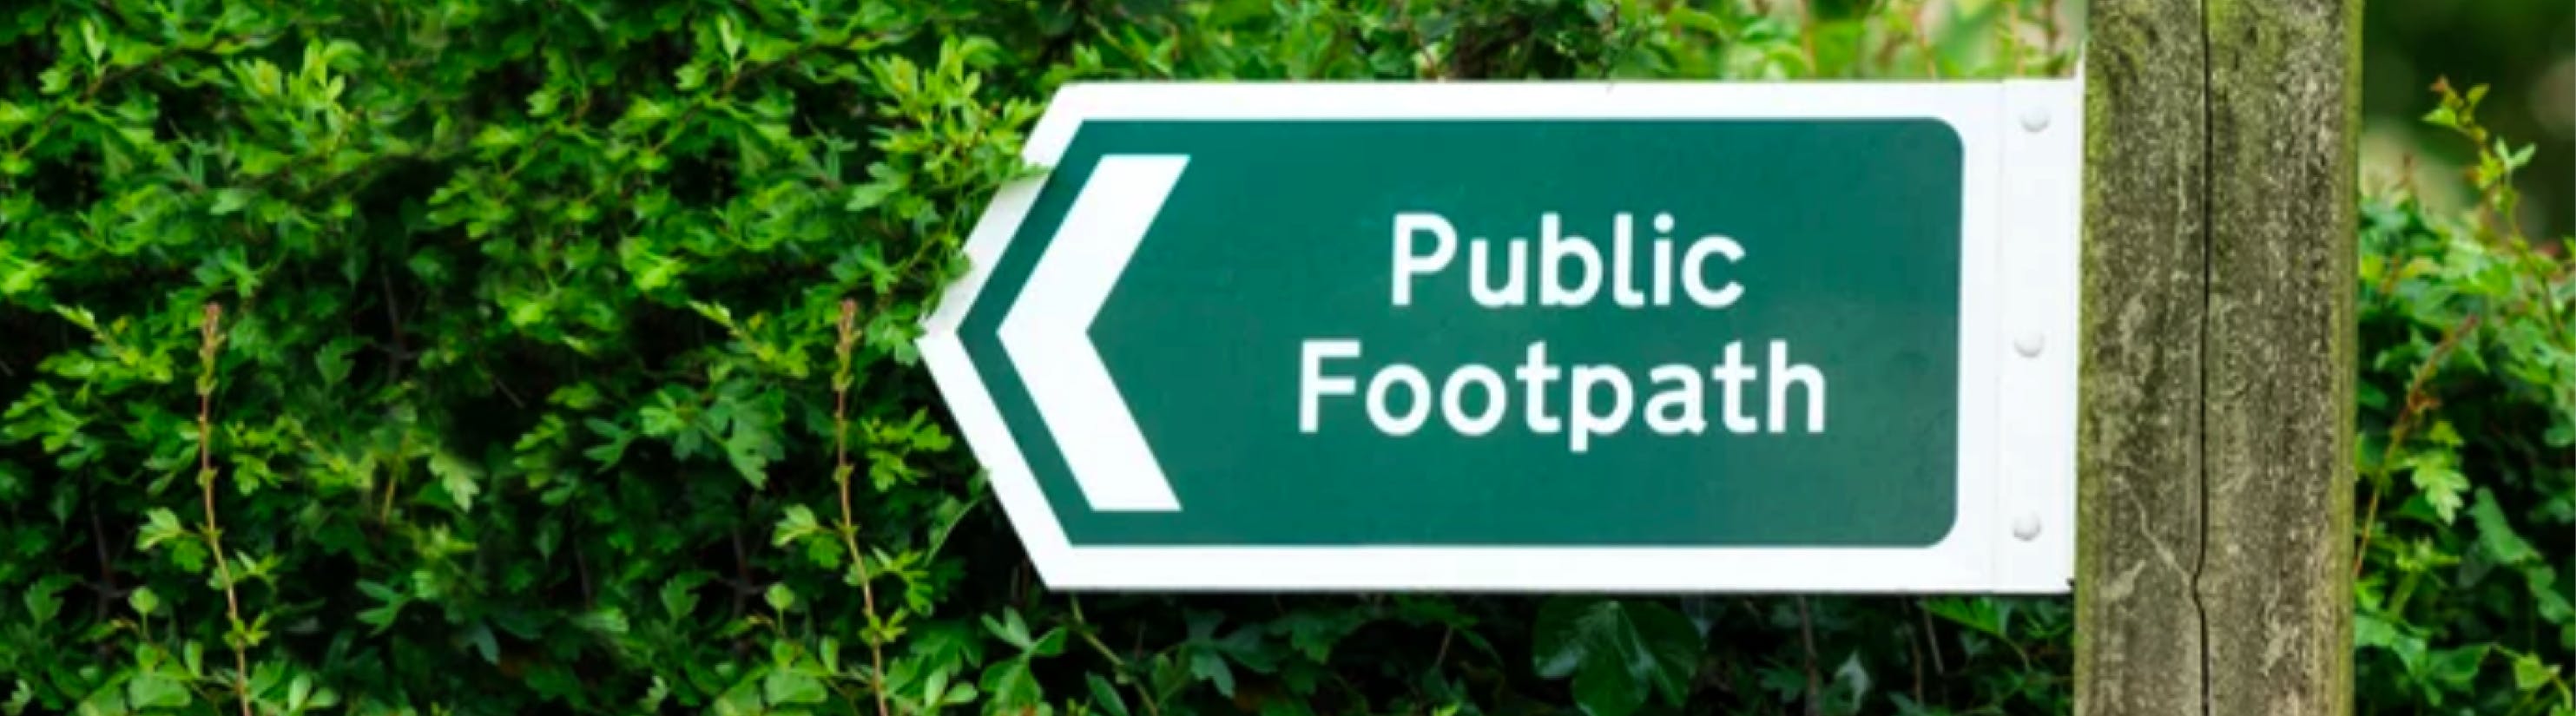 Road sign reading 'Public Footpath'